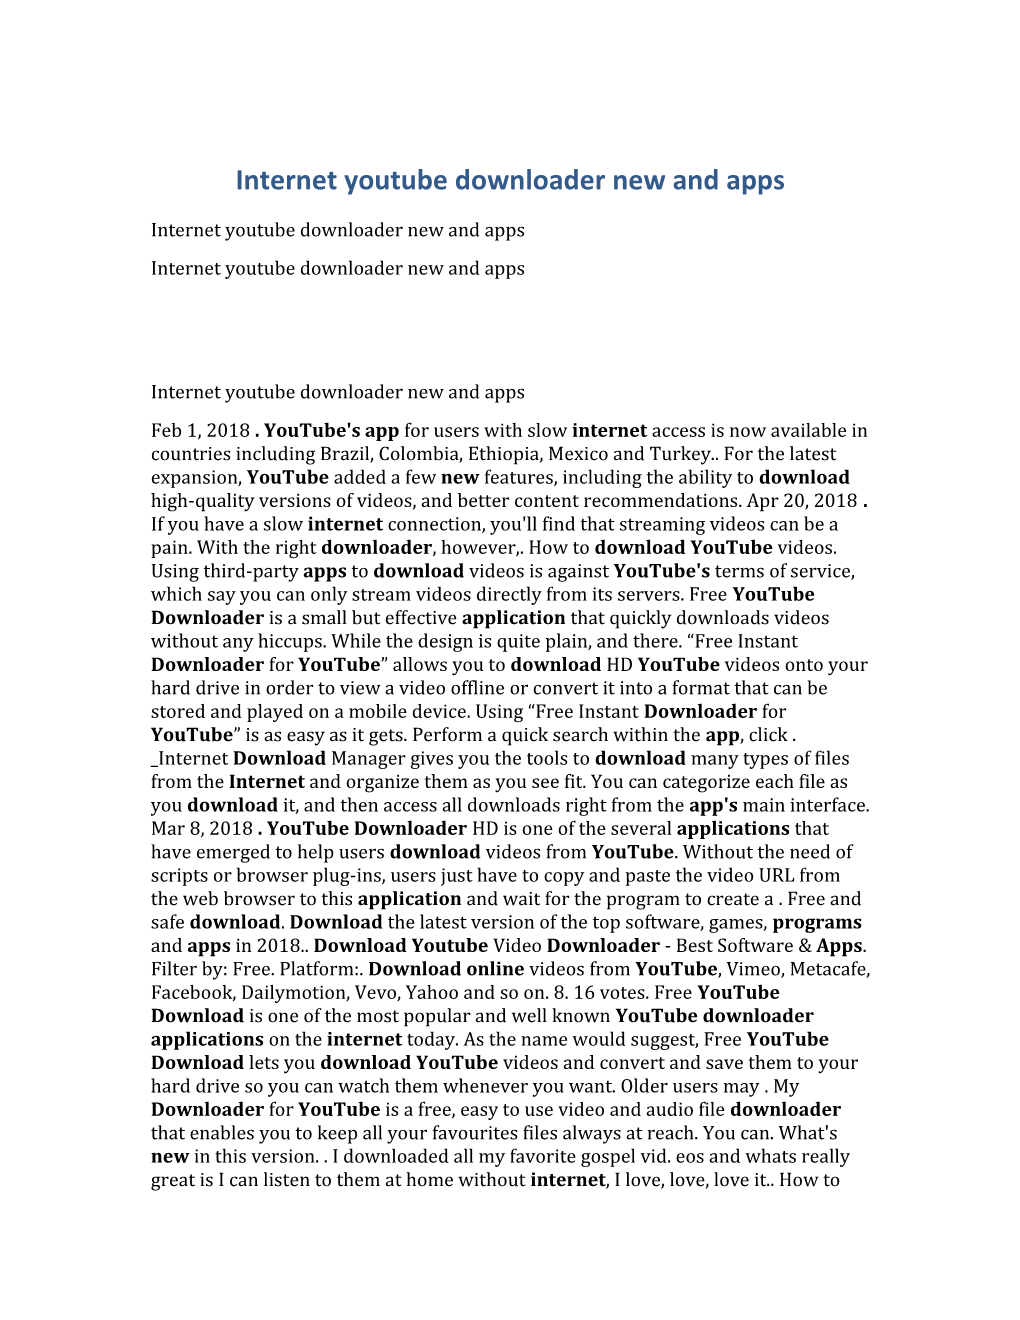 Internet Youtube Downloader New and Apps